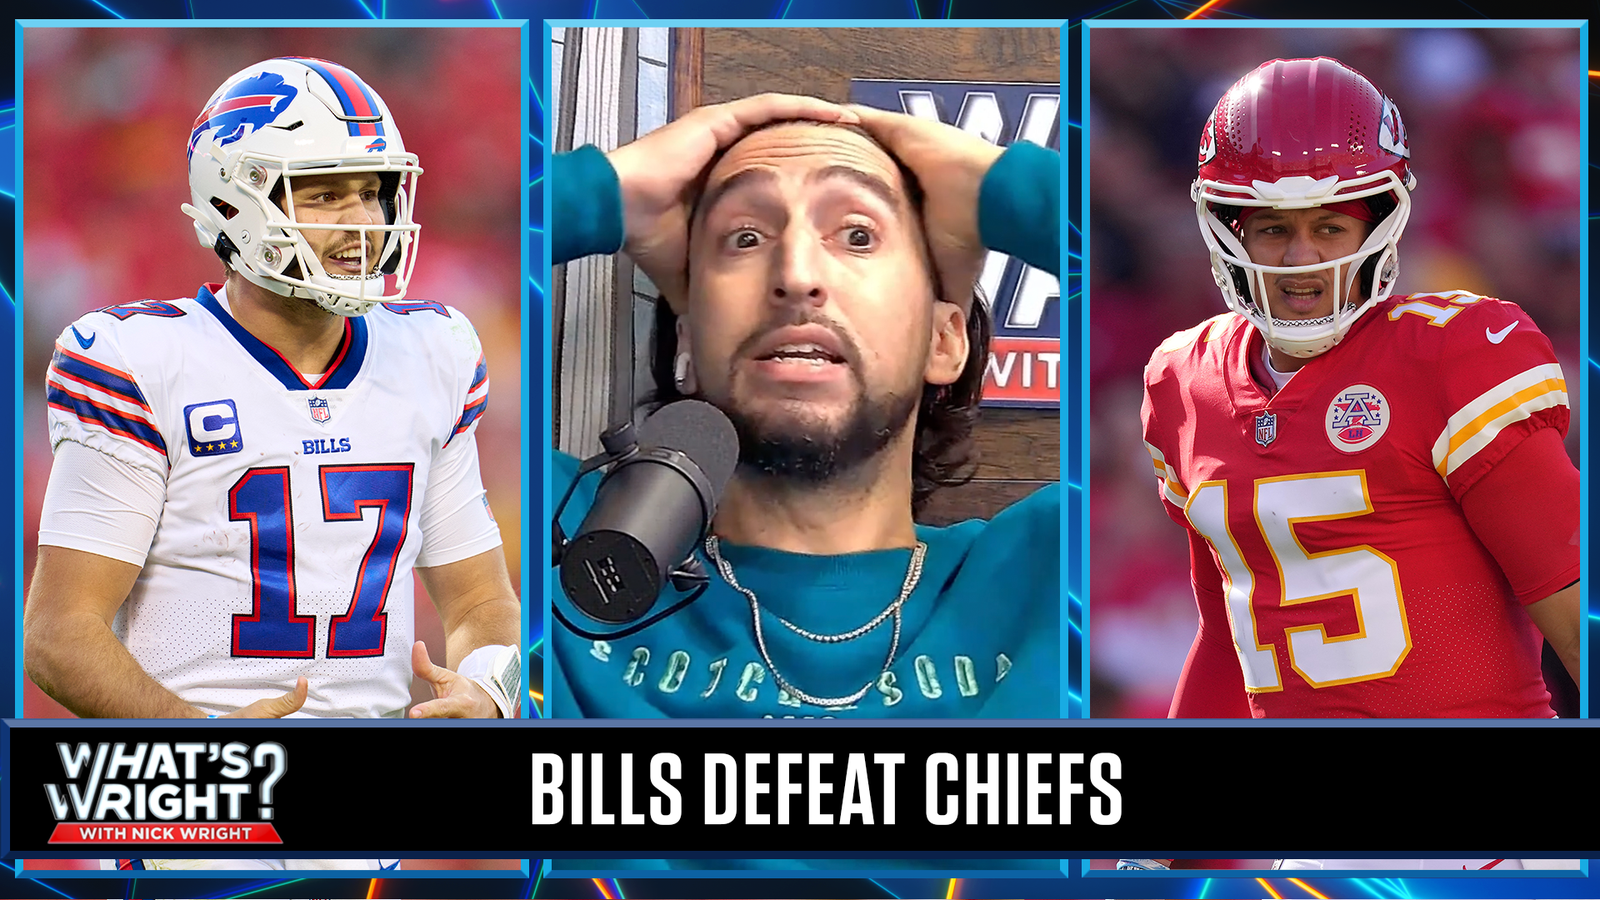 Nick shares some concerns after his Chiefs lose in Wk 6 to Bills | What's Wright?